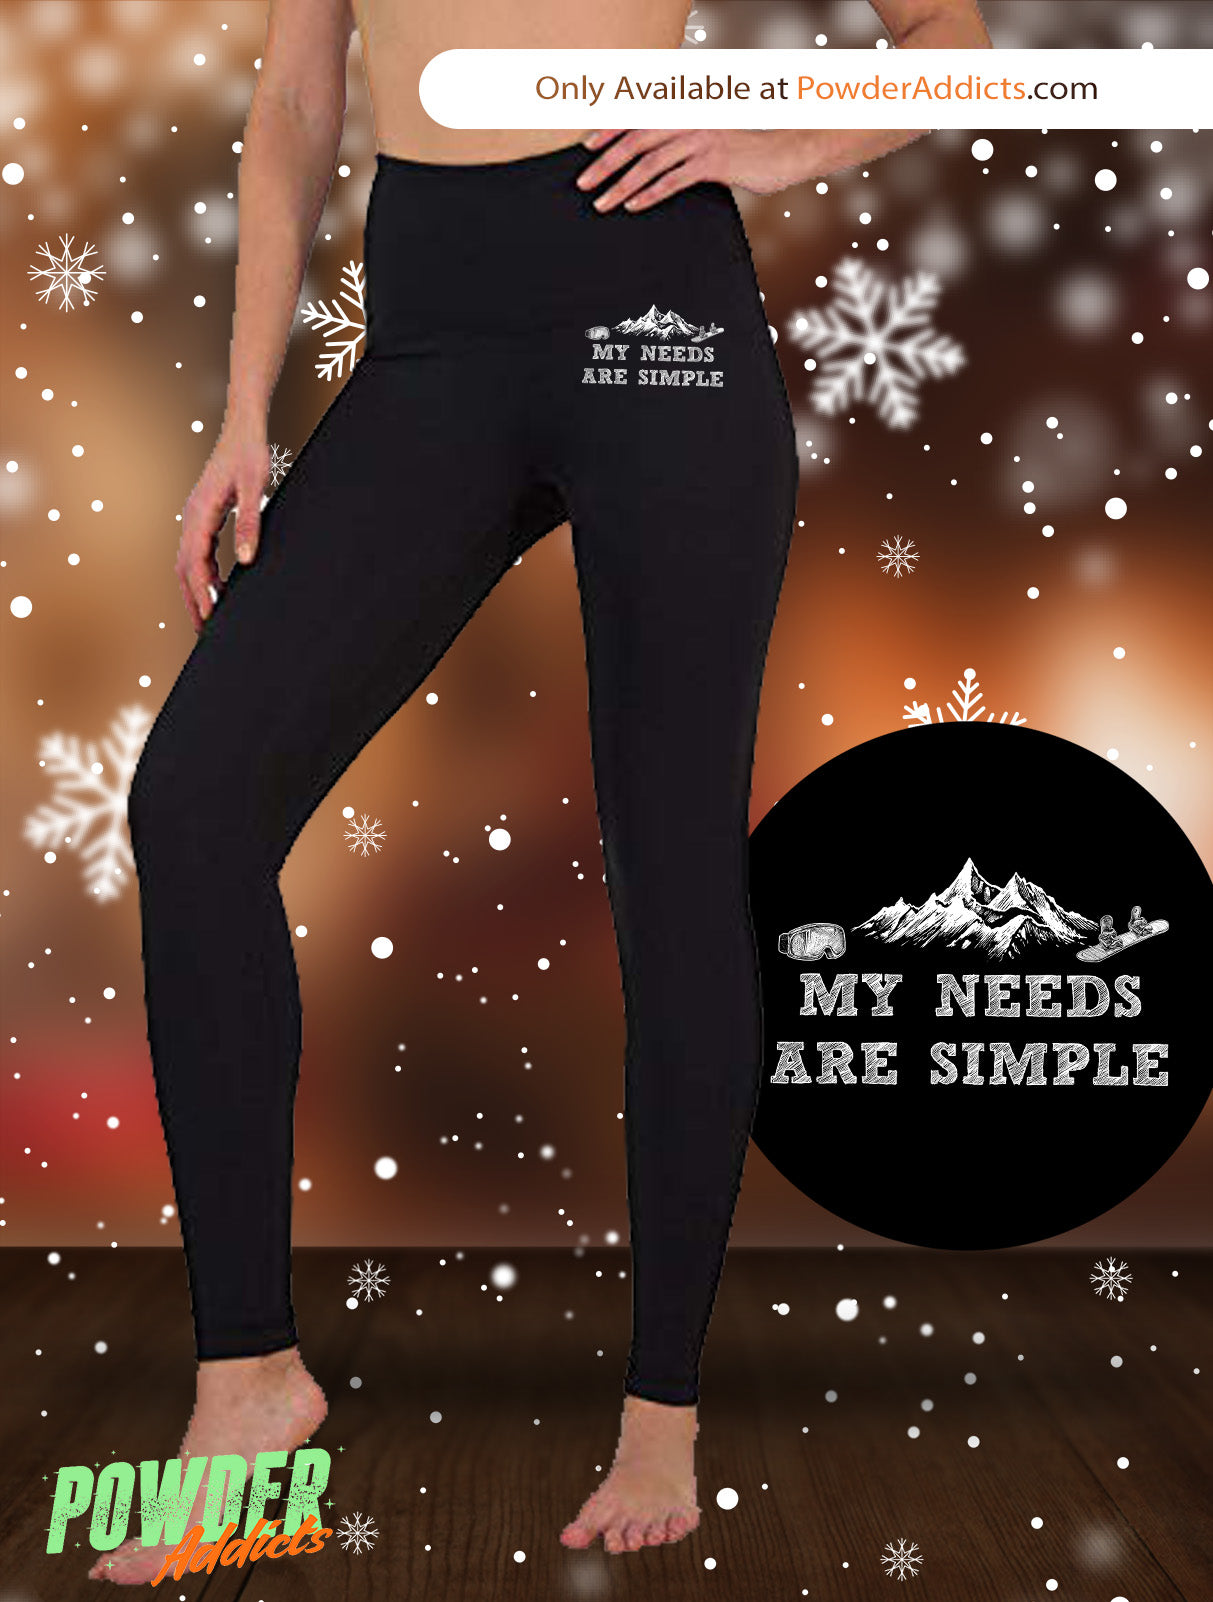 My Needs Are Simple Snowboard Women's Embroidered Leggings - Powderaddicts